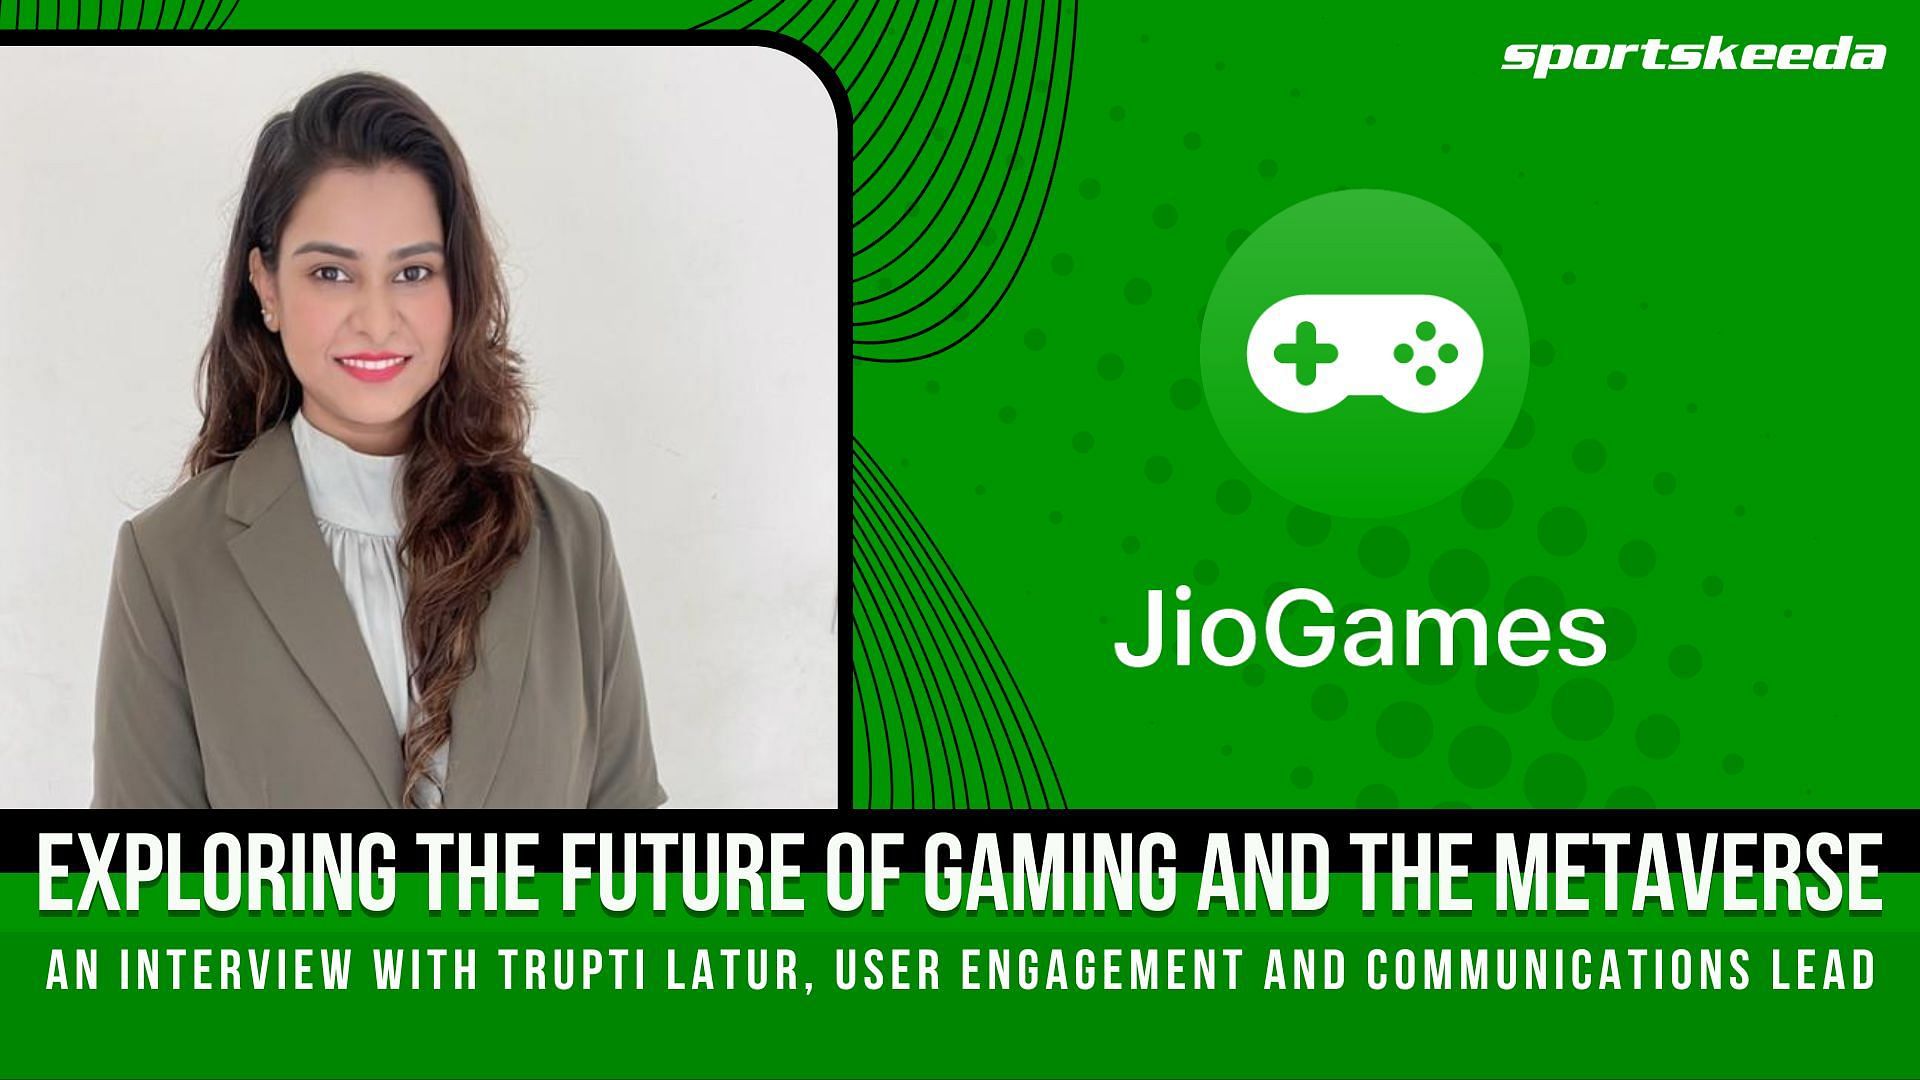 Interaction with Trupti Latur - User Engagement and Communications Lead, JioGames